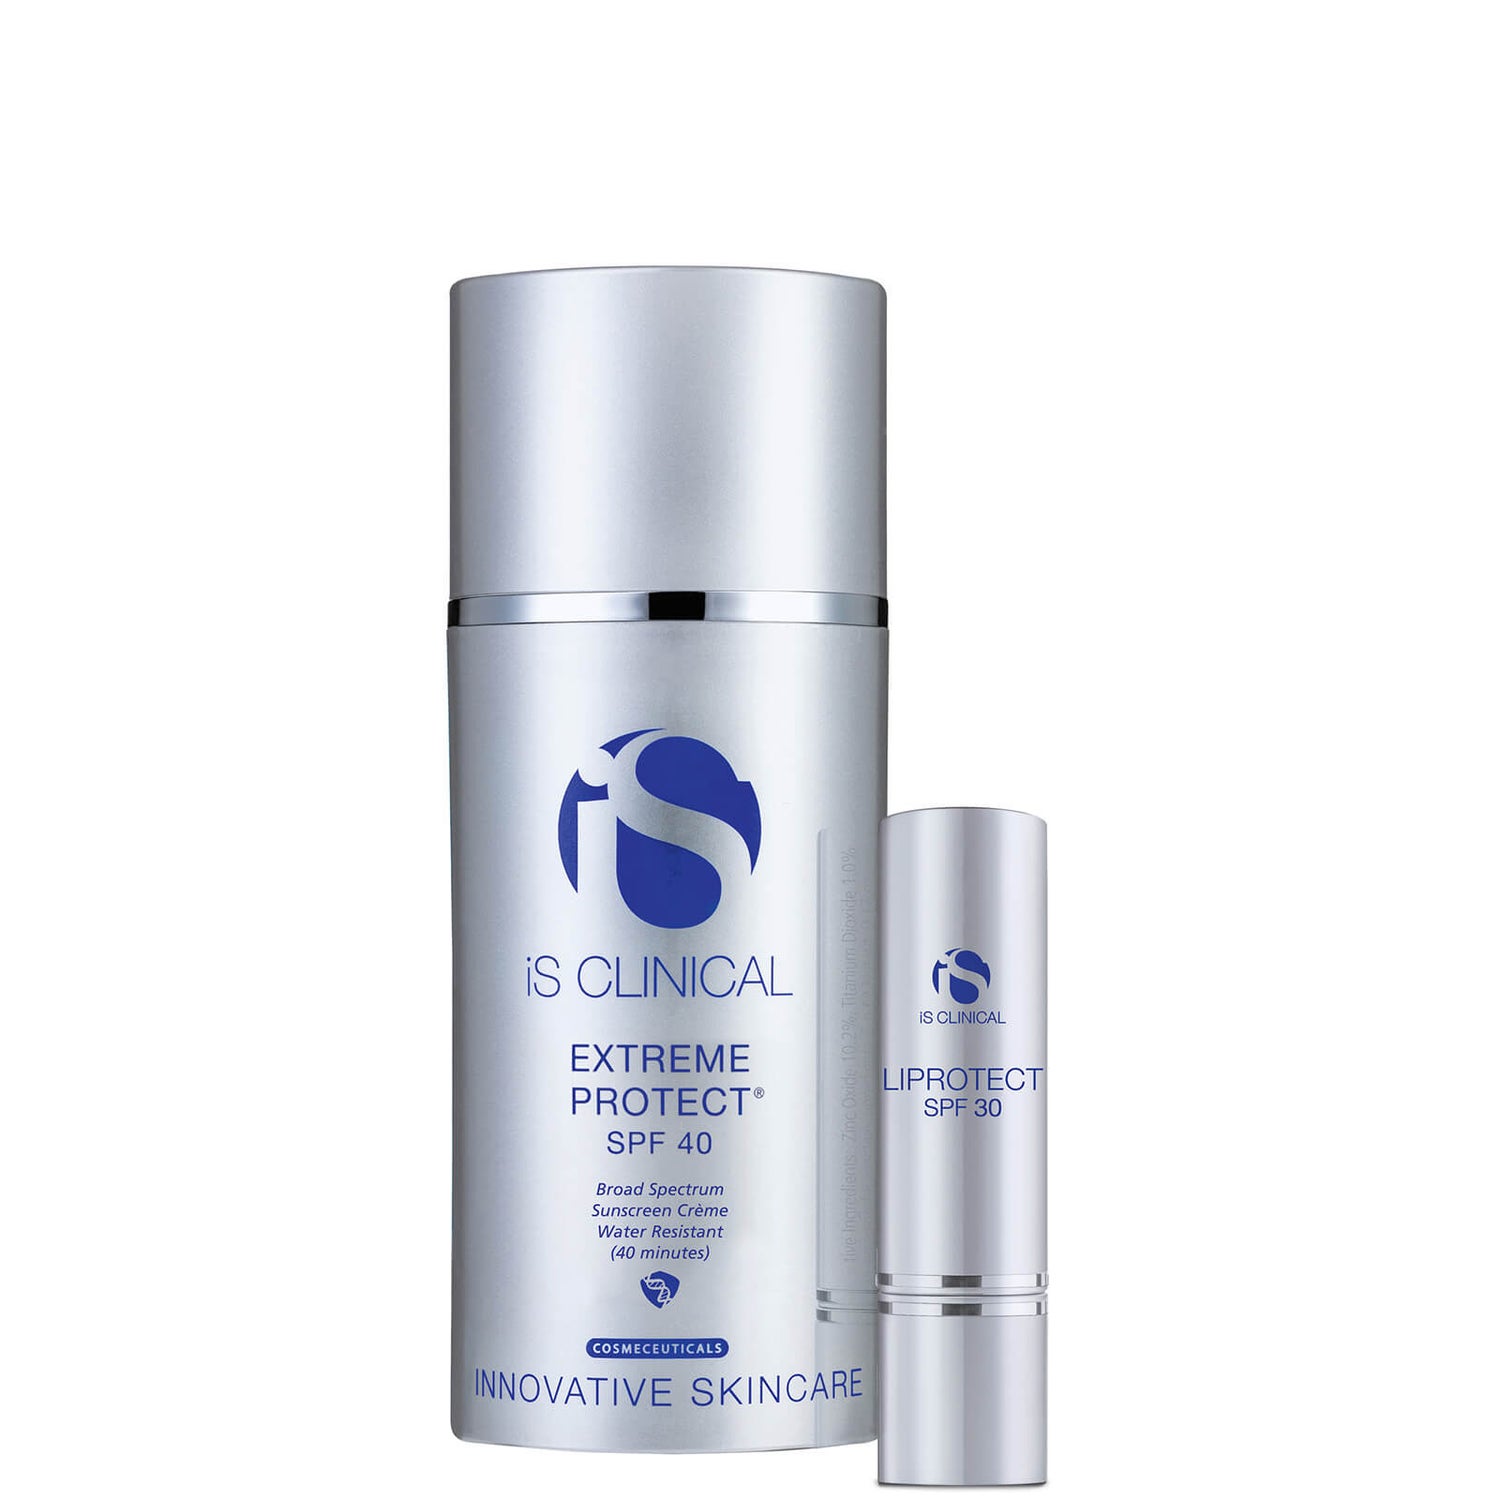 iS Clinical Ultimate Protection Duo 2 piece - $108 Value